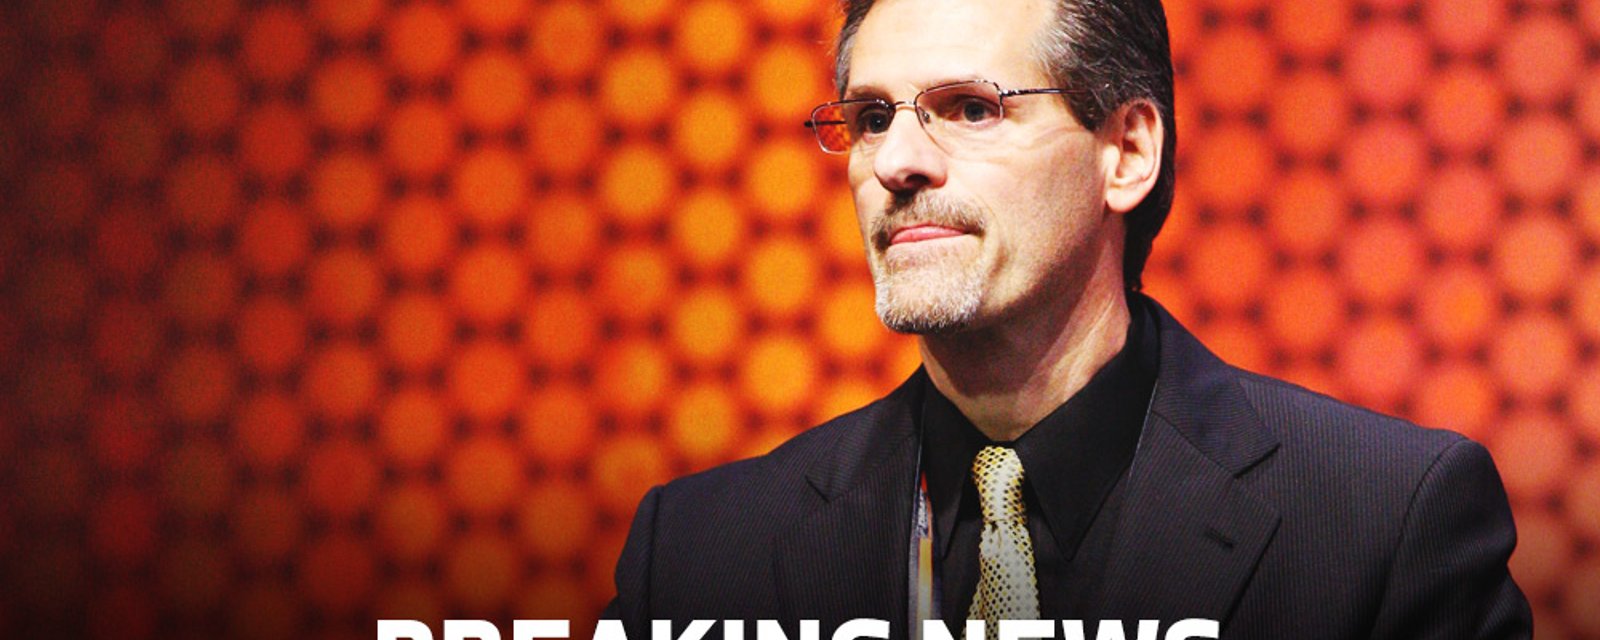 General manager Ron Hextall addresses the controversy around his team.